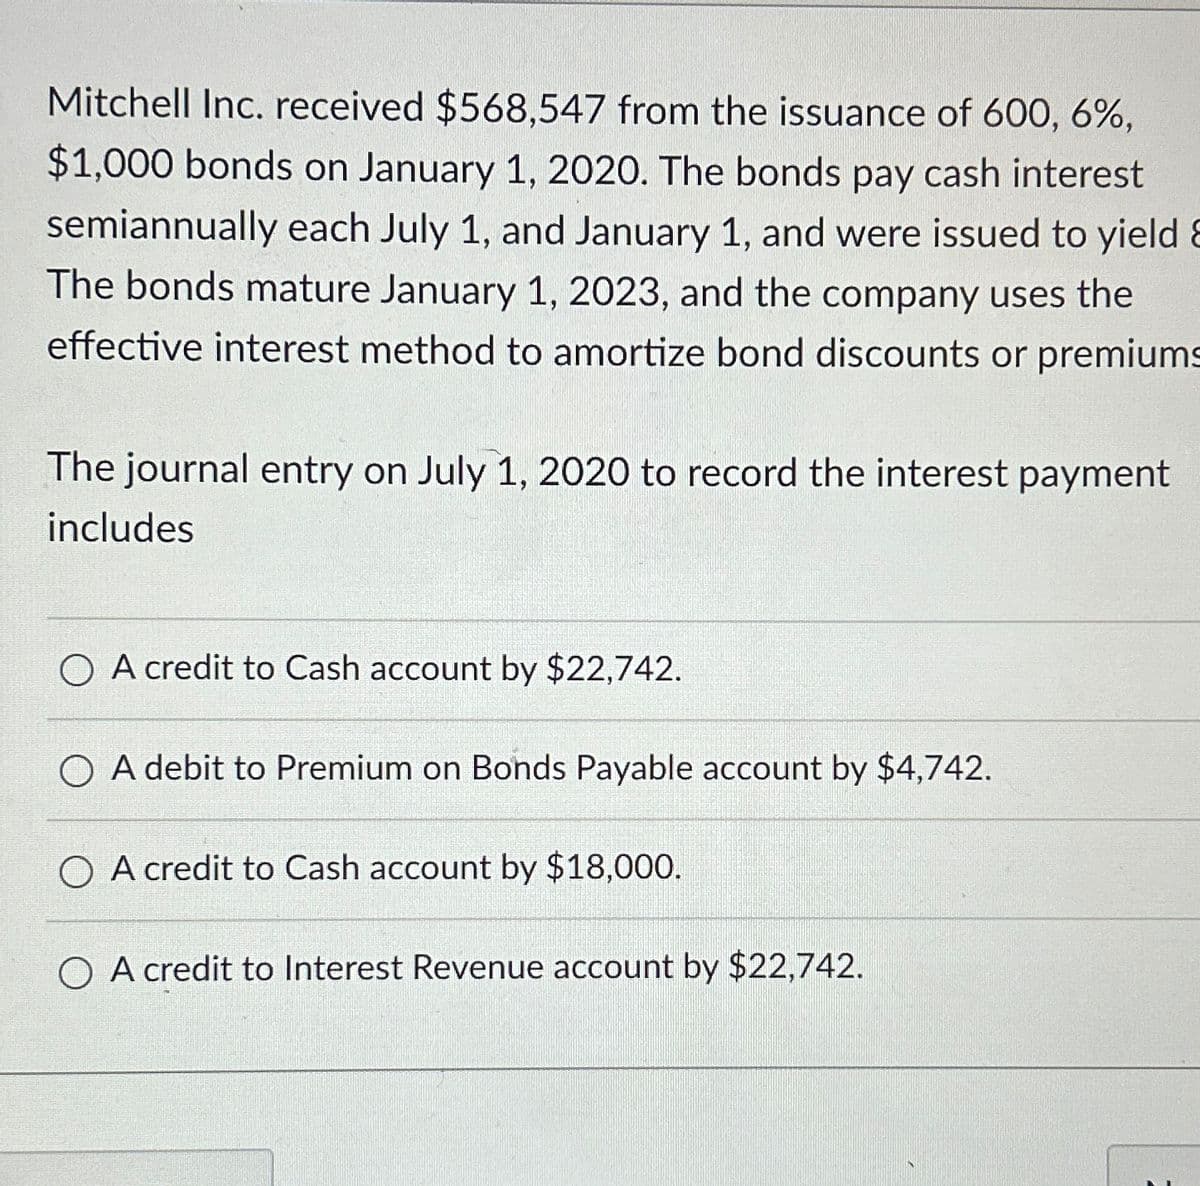 Mitchell Inc. received $568,547 from the issuance of 600, 6%,
$1,000 bonds on January 1, 2020. The bonds pay cash interest
semiannually each July 1, and January 1, and were issued to yield &
The bonds mature January 1, 2023, and the company uses the
effective interest method to amortize bond discounts or premiums
The journal entry on July 1, 2020 to record the interest payment
includes
OA credit to Cash account by $22,742.
A debit to Premium on Bonds Payable account by $4,742.
A credit to Cash account by $18,000.
OA credit to Interest Revenue account by $22,742.